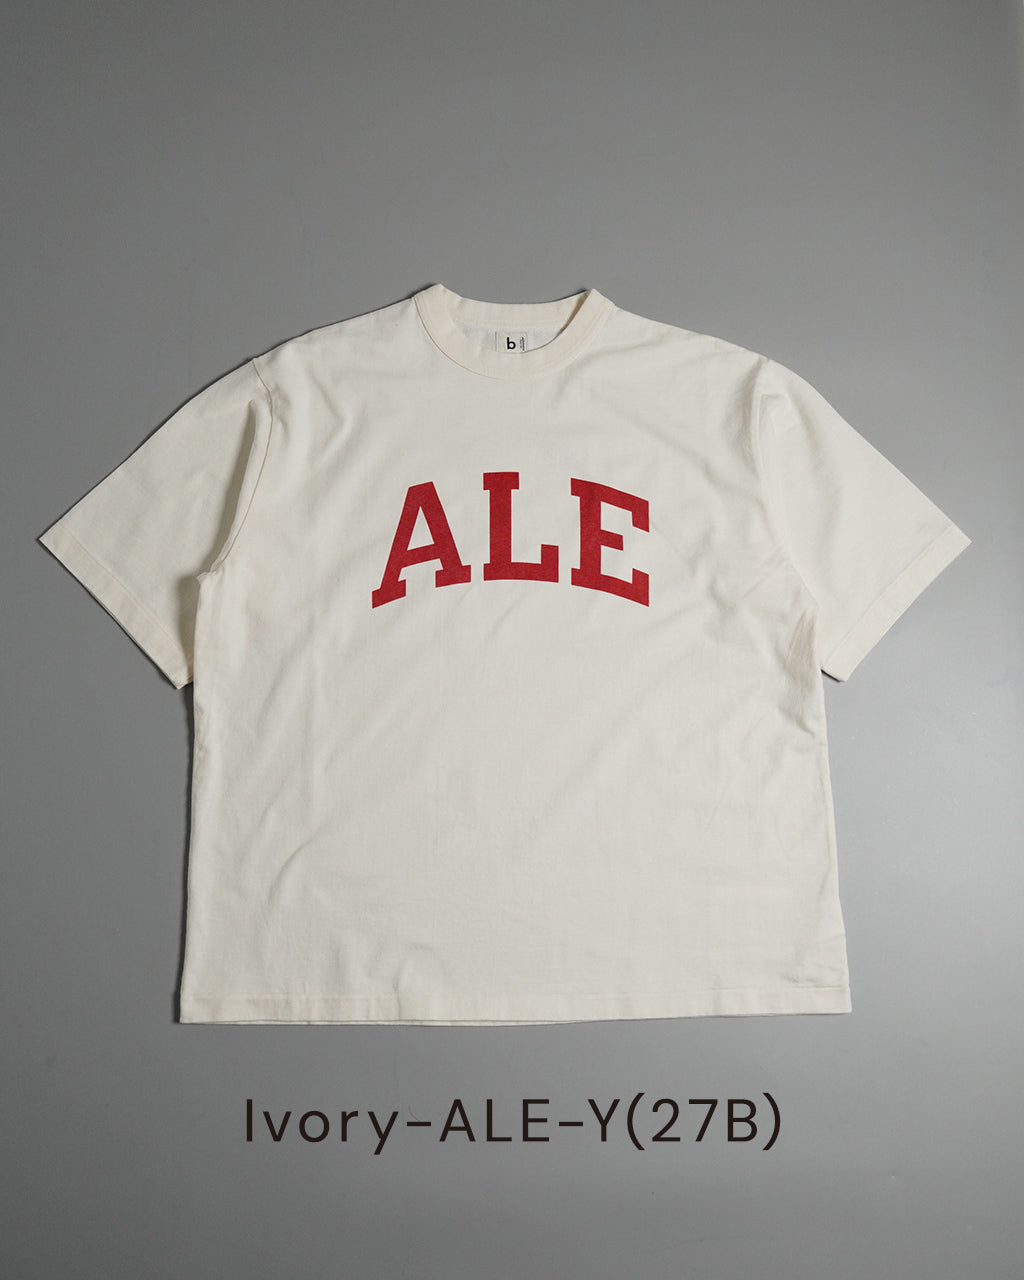 blurhms ROOTSTOCK ブラームス ルーツストック プリント Tシャツ ワイド ALE-Y 88/12 Print Tee WIDE【送料無料】正規取扱店